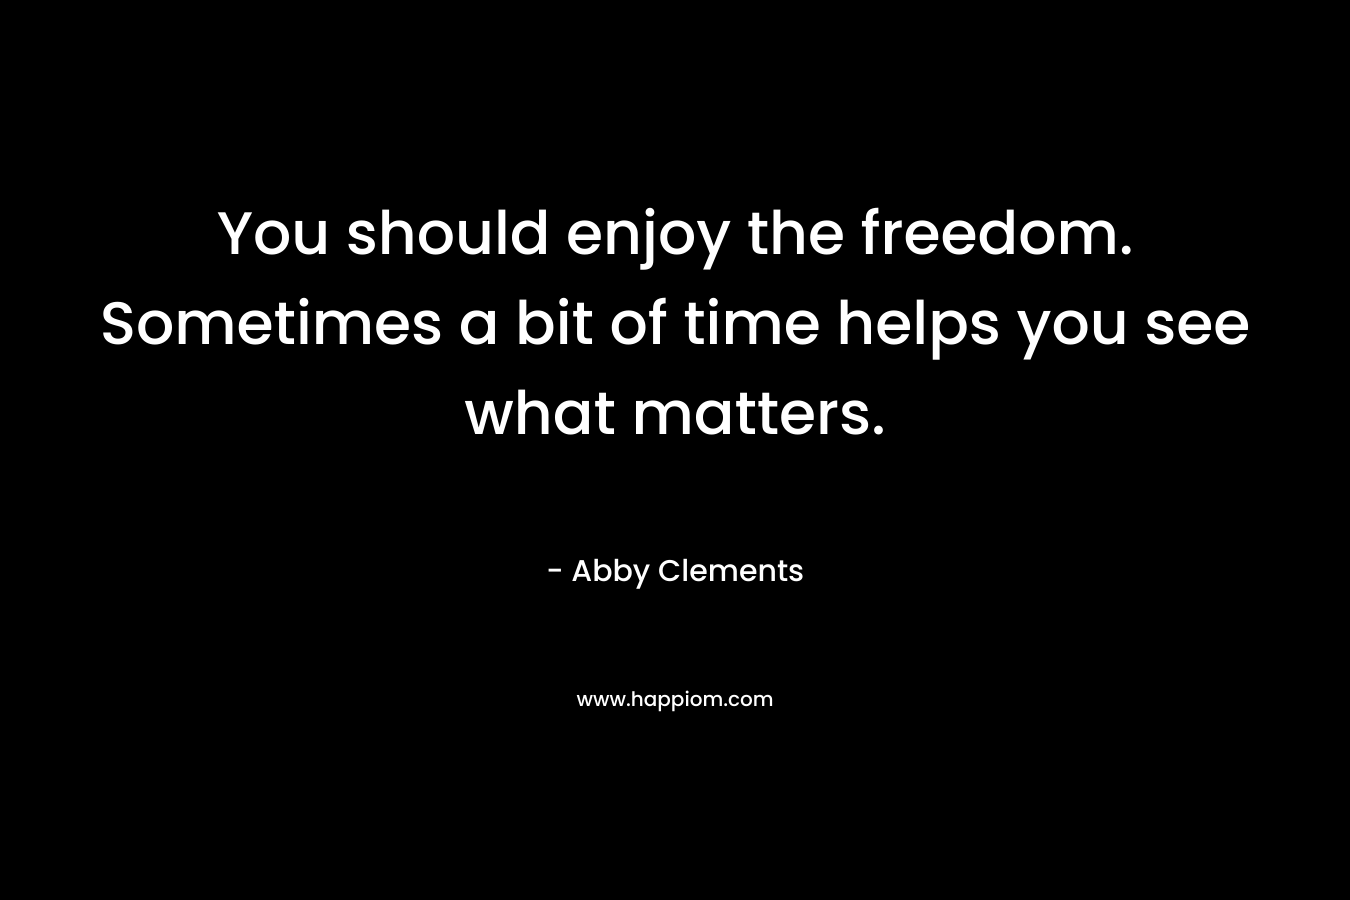 You should enjoy the freedom. Sometimes a bit of time helps you see what matters.